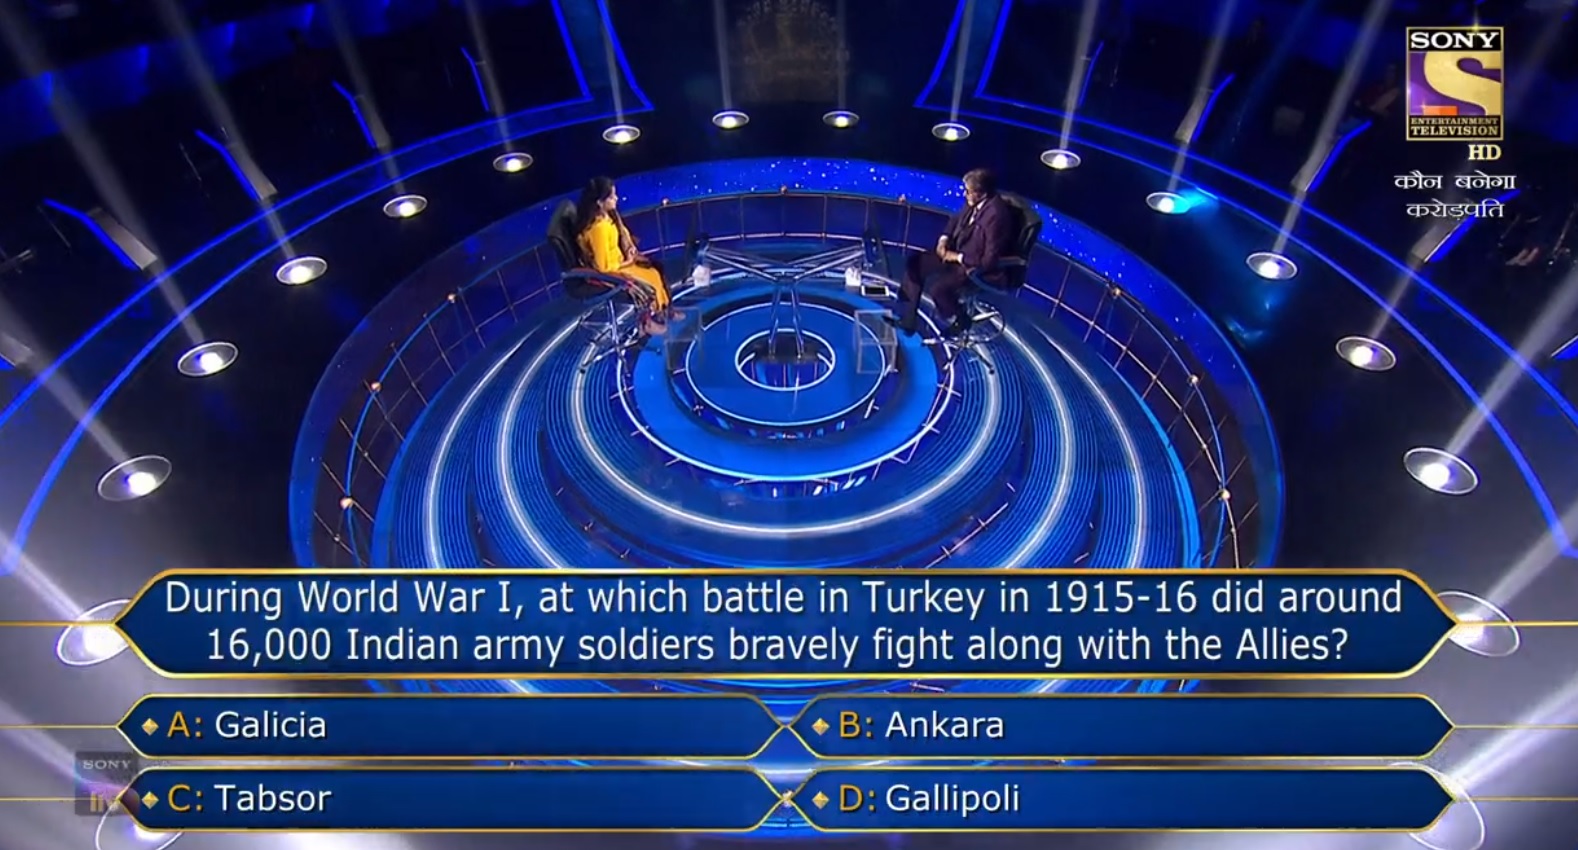 Ques : During the world war I, at which battle in Turkey in 1915-16 did around 16,000 Indian army soldiers fight along with the Allies?